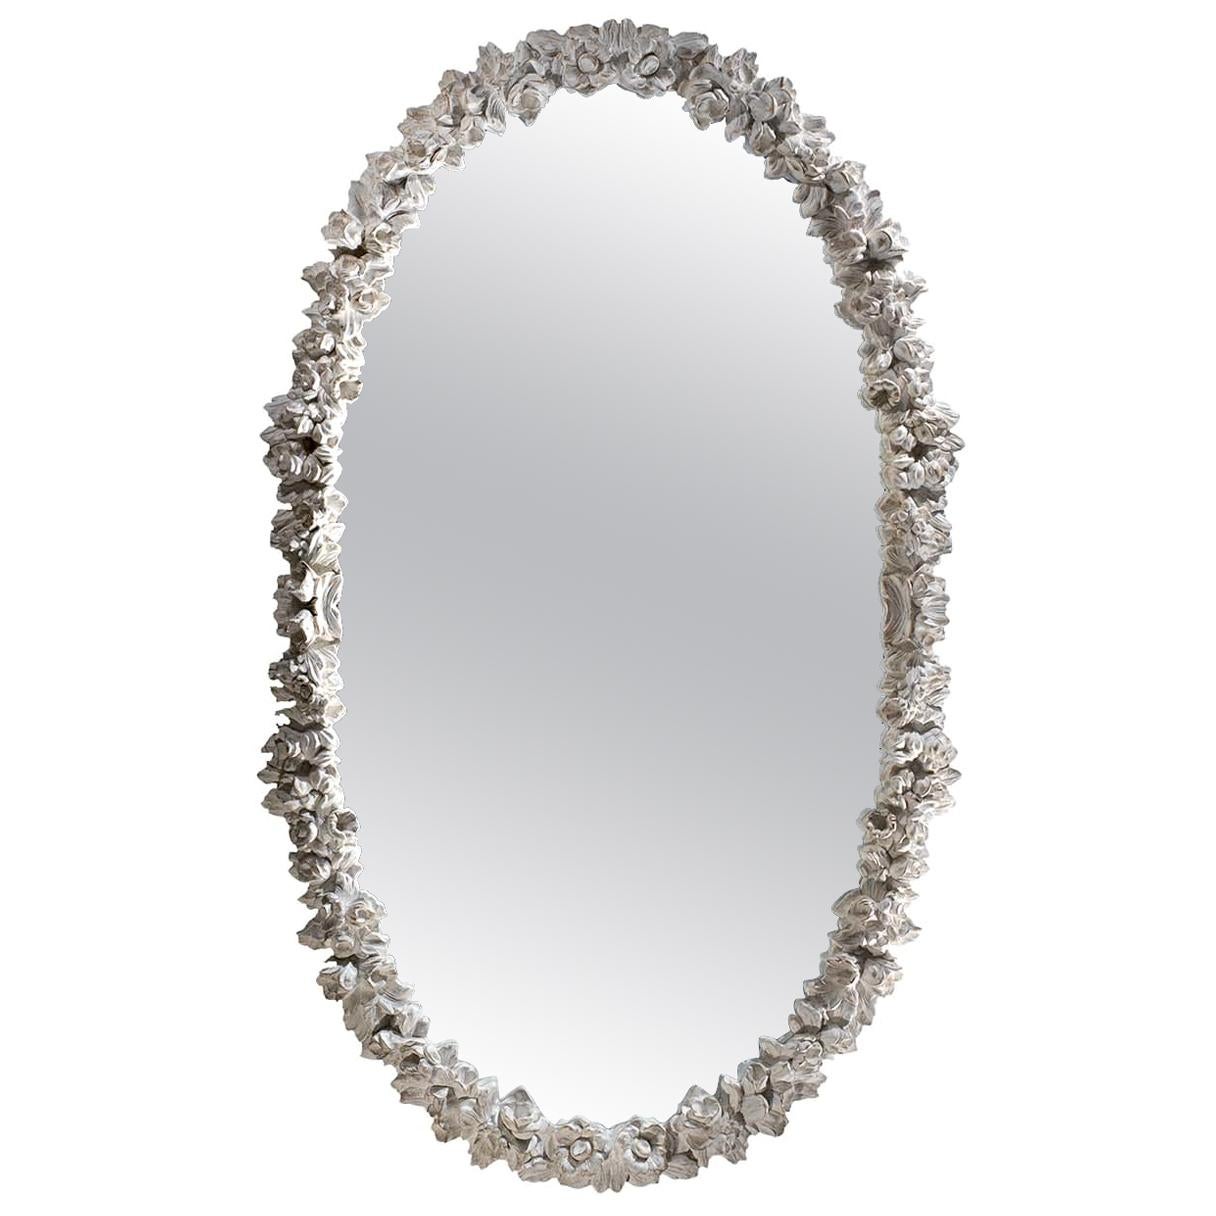 Antique White Oval Wall Mirror by Spini Firenze